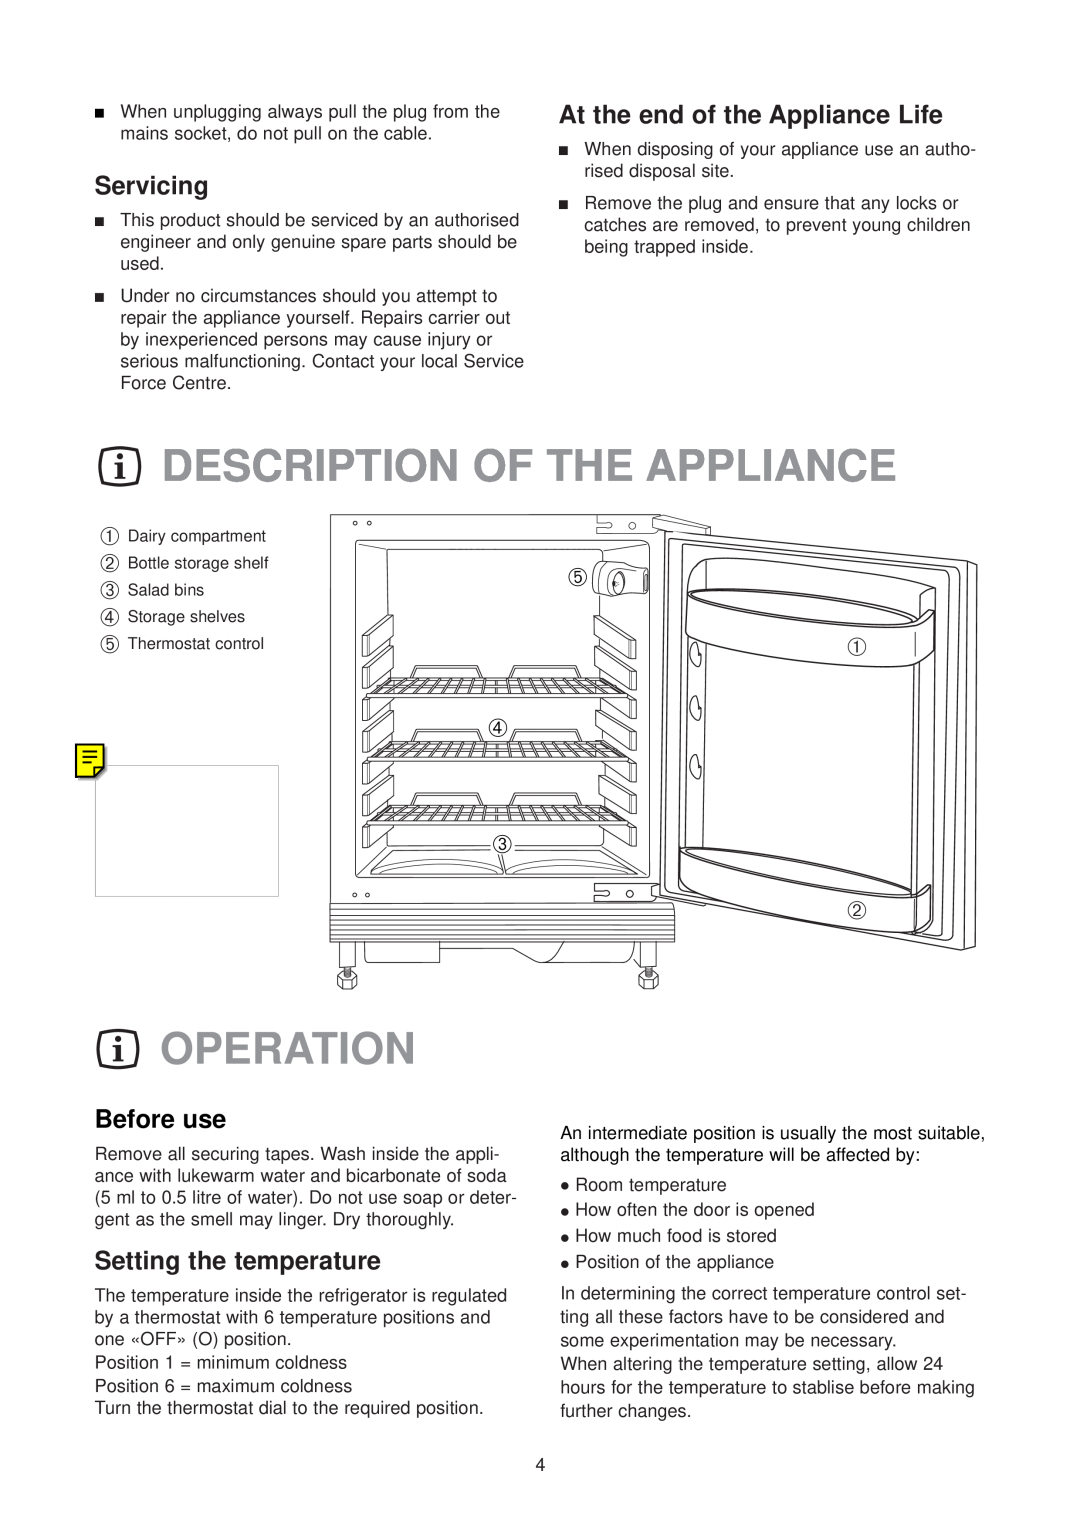 Electrolux ER 6436 Description Of The Appliance, Operation, Servicing, At the end of the Appliance Life, ➃ ➂ ➁, Before use 